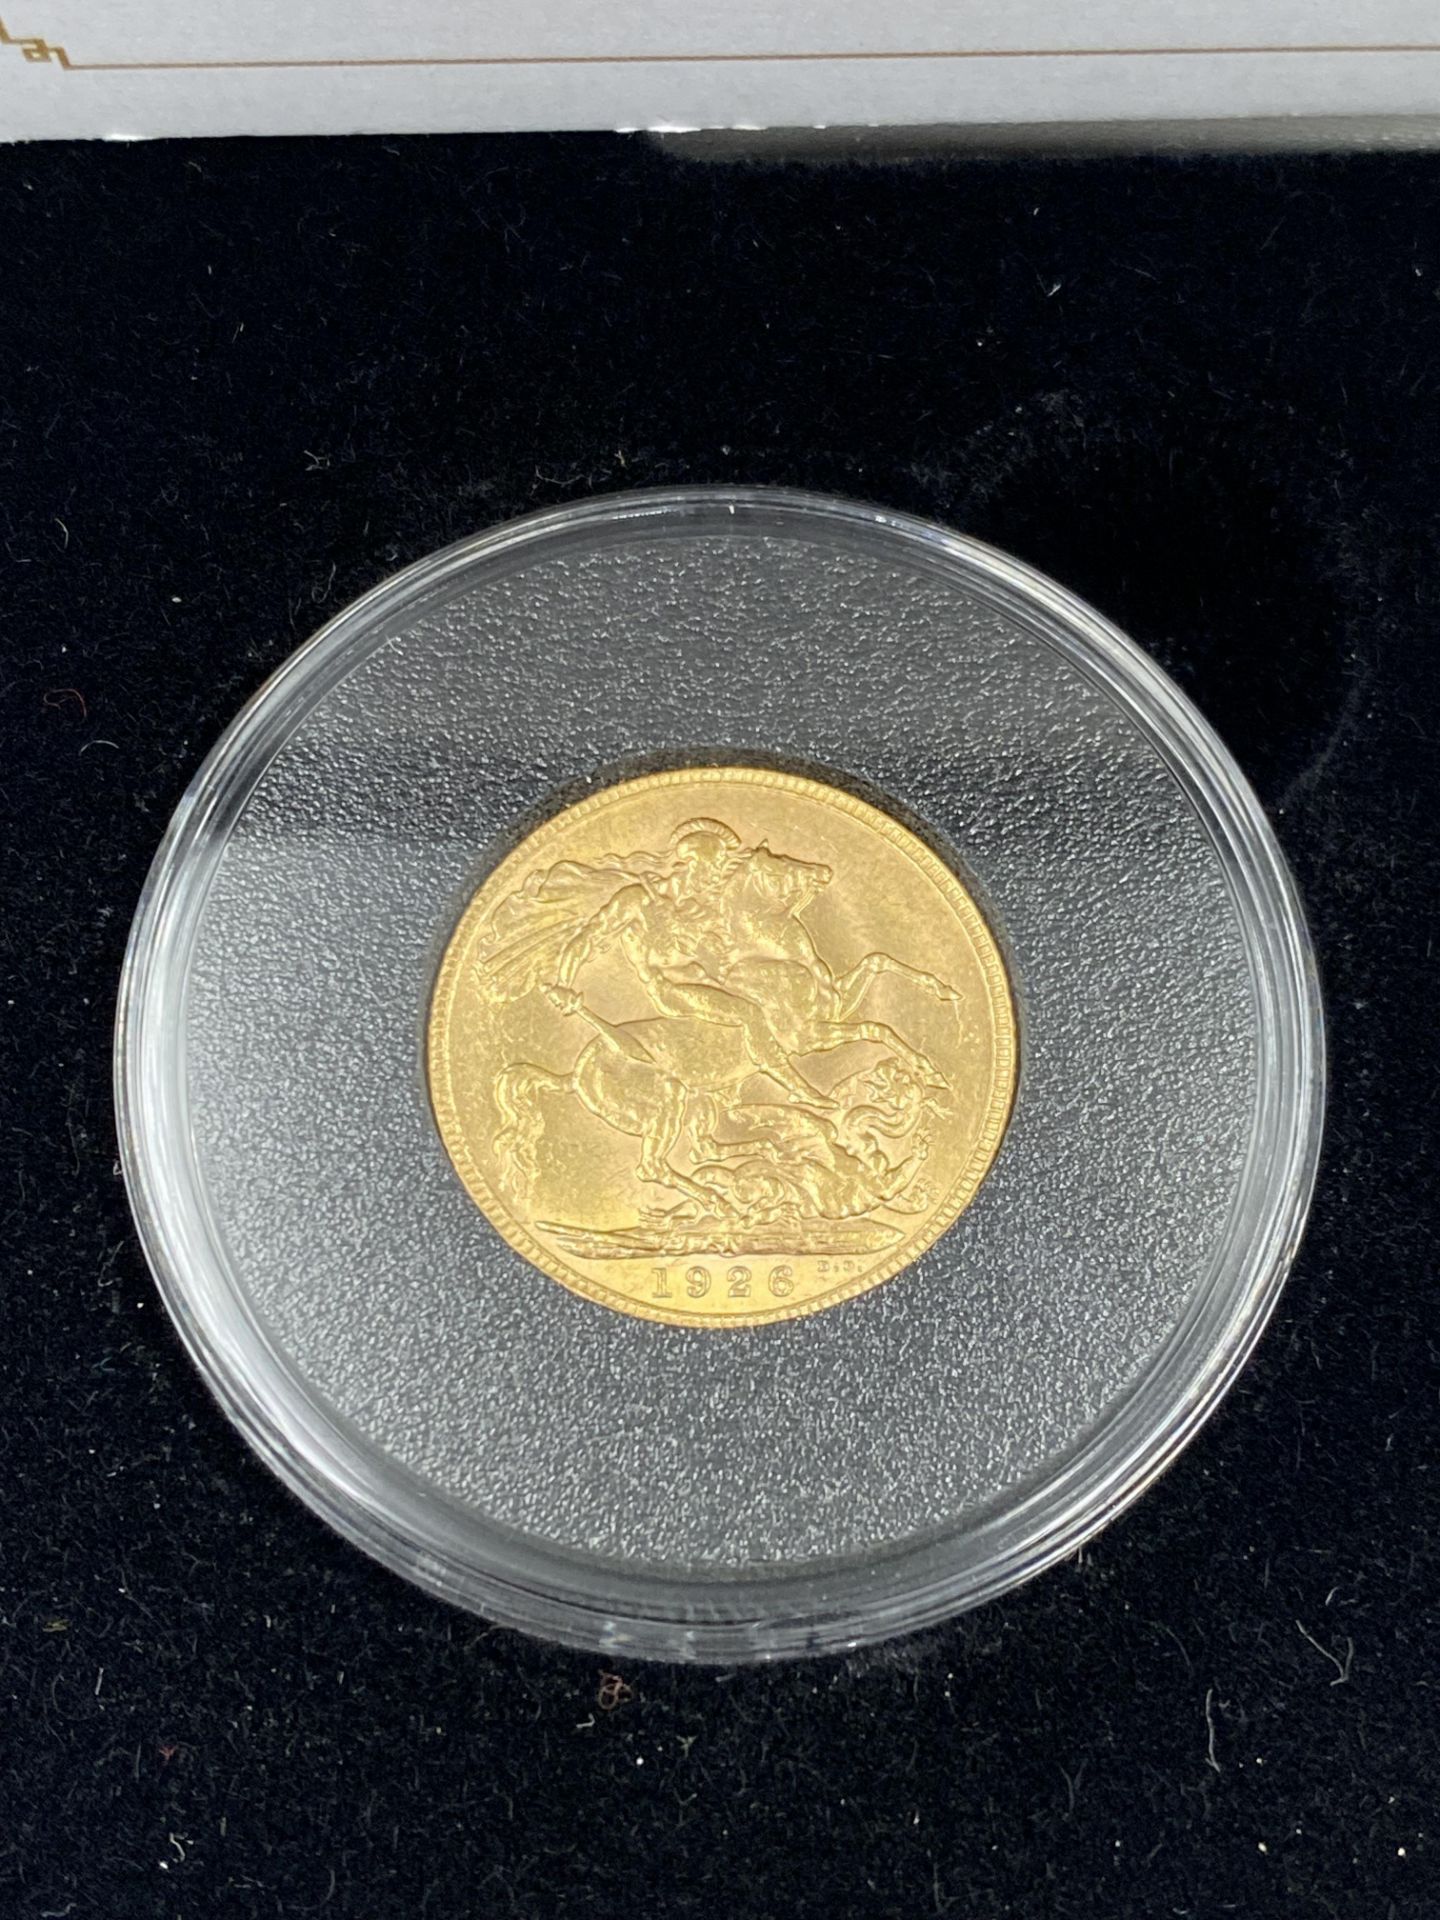 Jubilee Mint - Queen's 95th Birthday Gold Sovereign Pair - Image 3 of 5